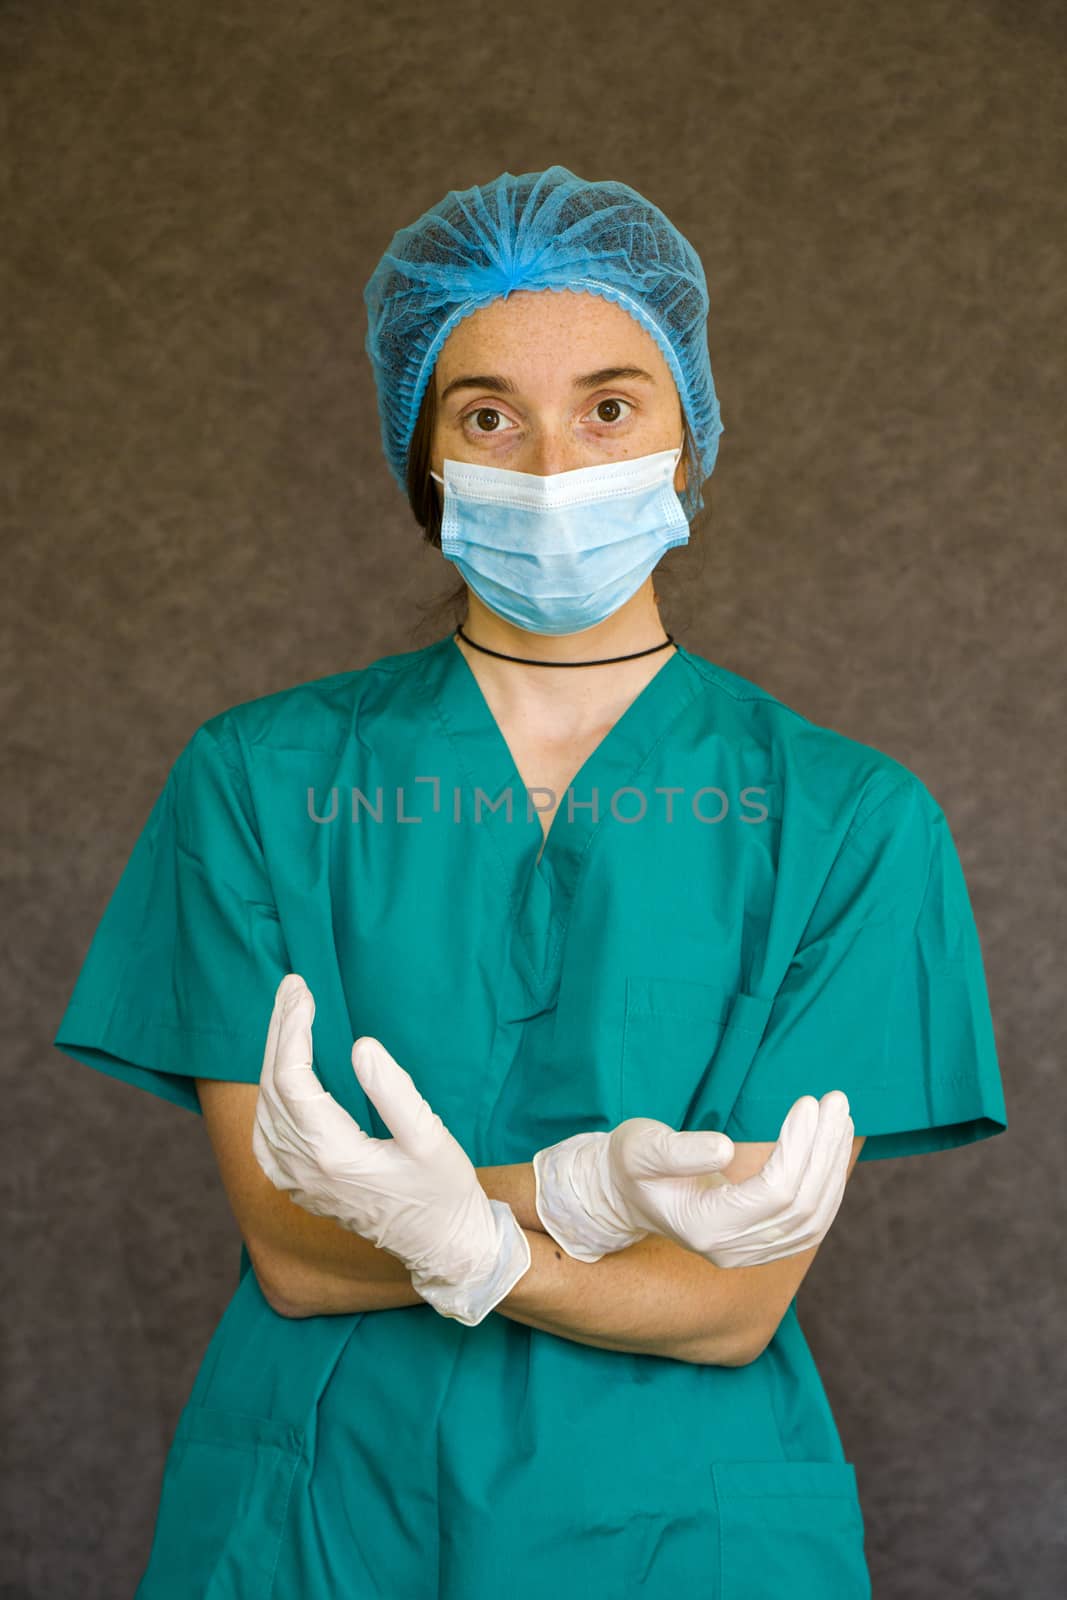 Doctor or nurse form, woman portrait in medical uniform, mask, glove and surgical cap by Taidundua